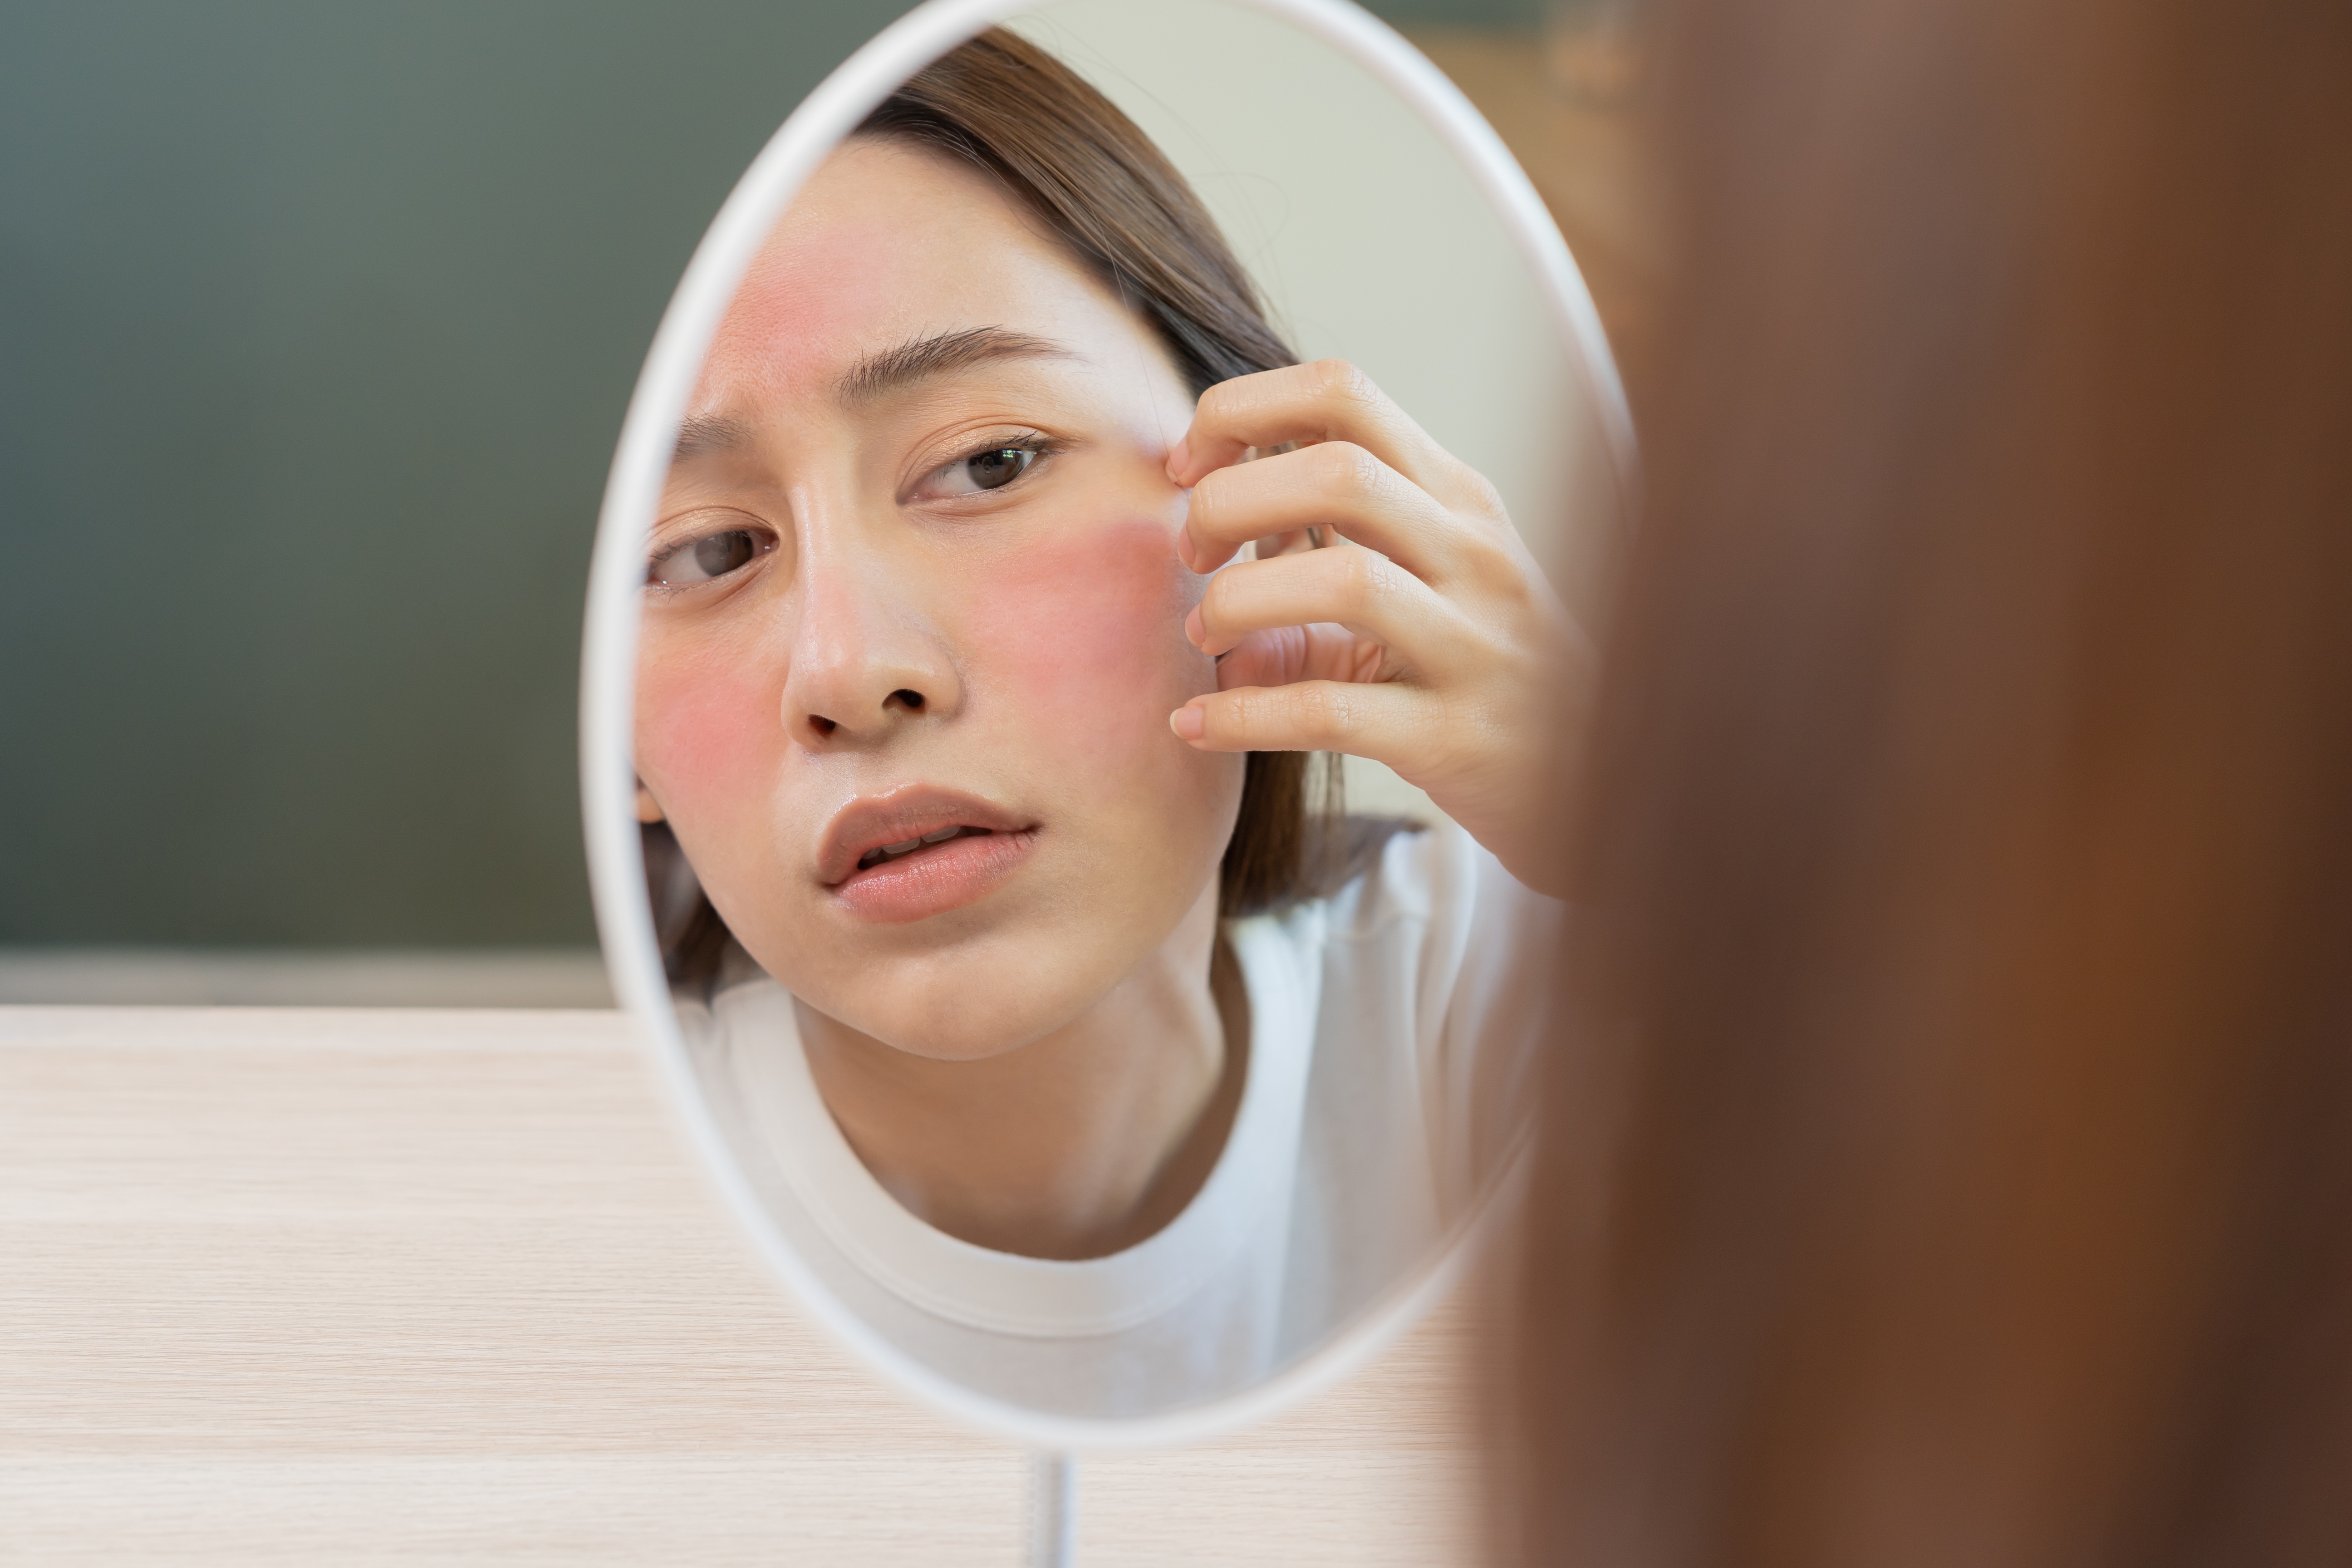 A woman with rashes looks at the mirror. | Source: Shutterstock